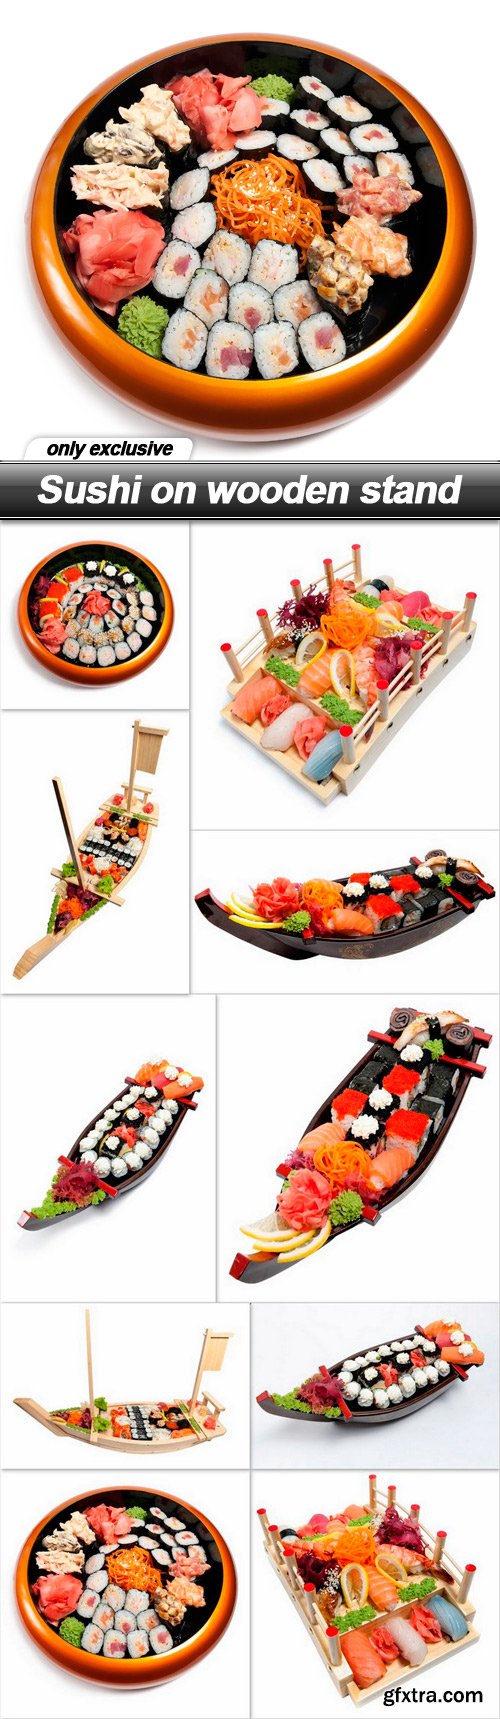 Sushi on wooden stand - 10 UHQ JPEG